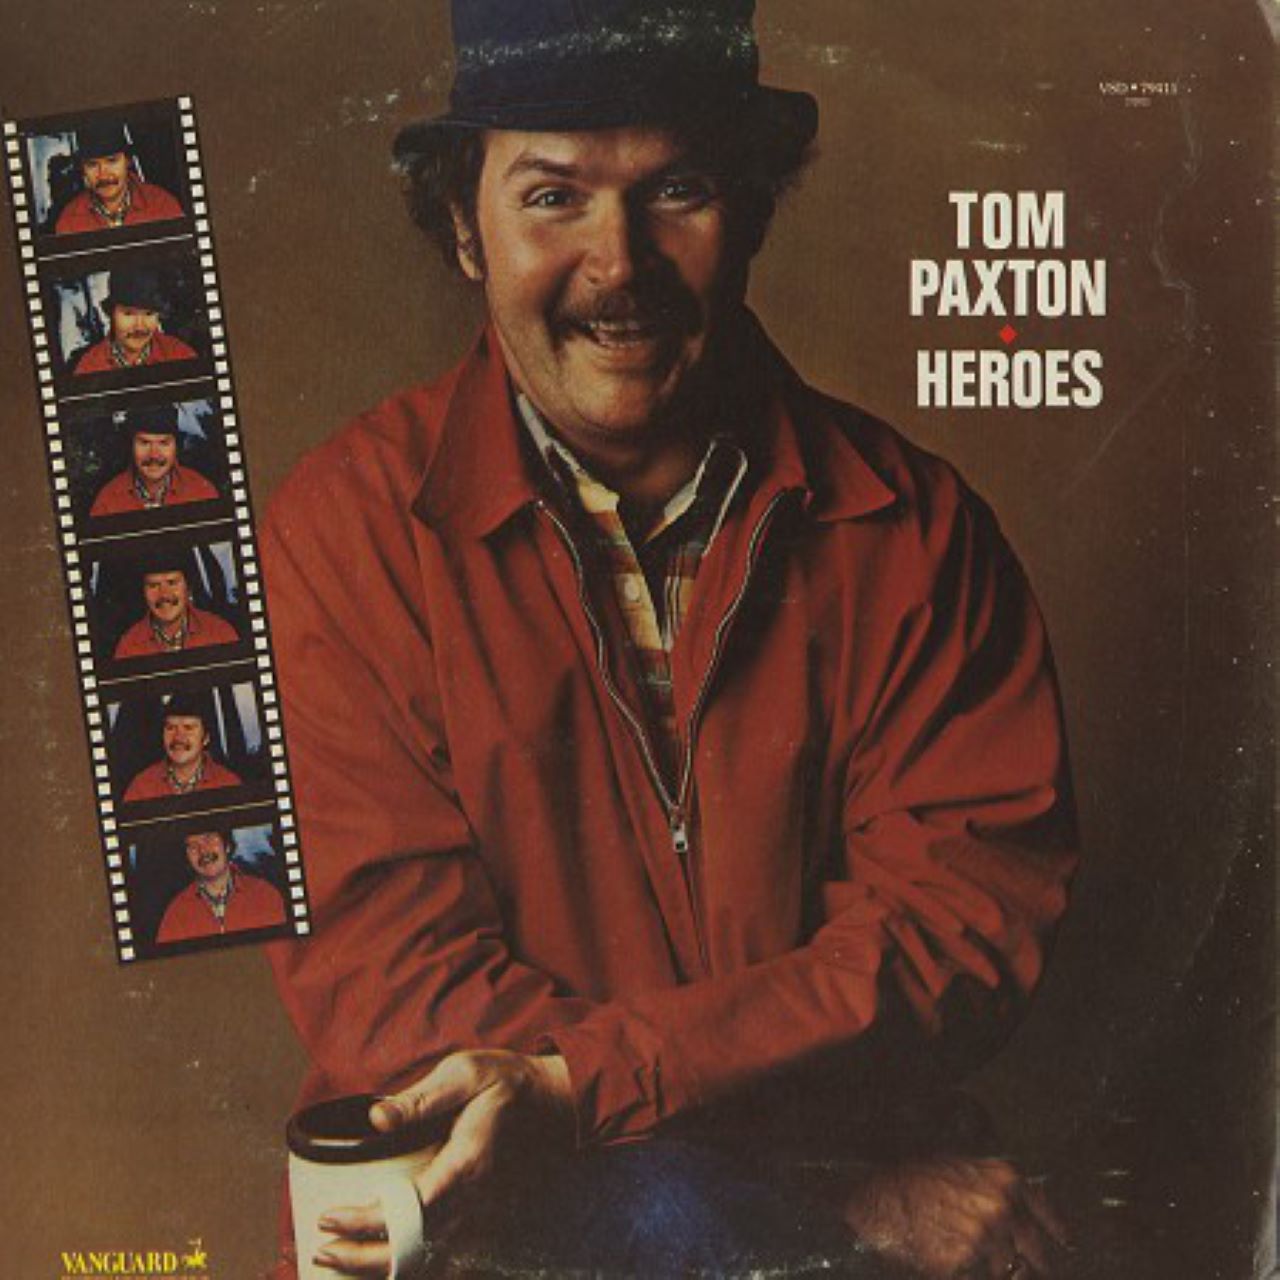 Tom Paxton - Heroes cover album